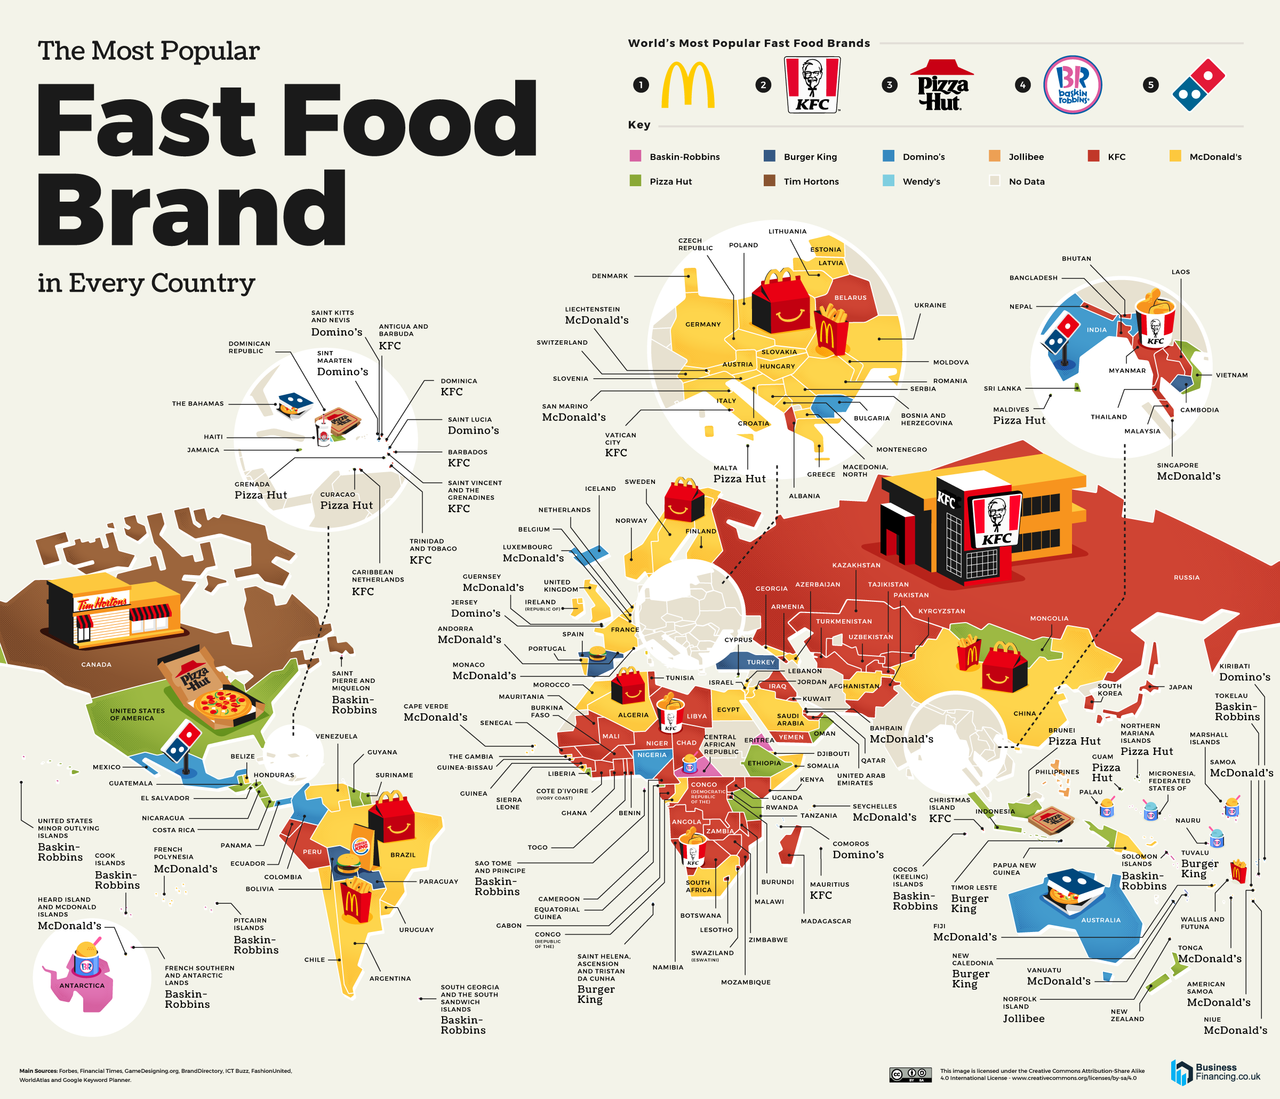 09_Most-Popular-Consumer-Brand-in-Every-Country_Fast-Food.png